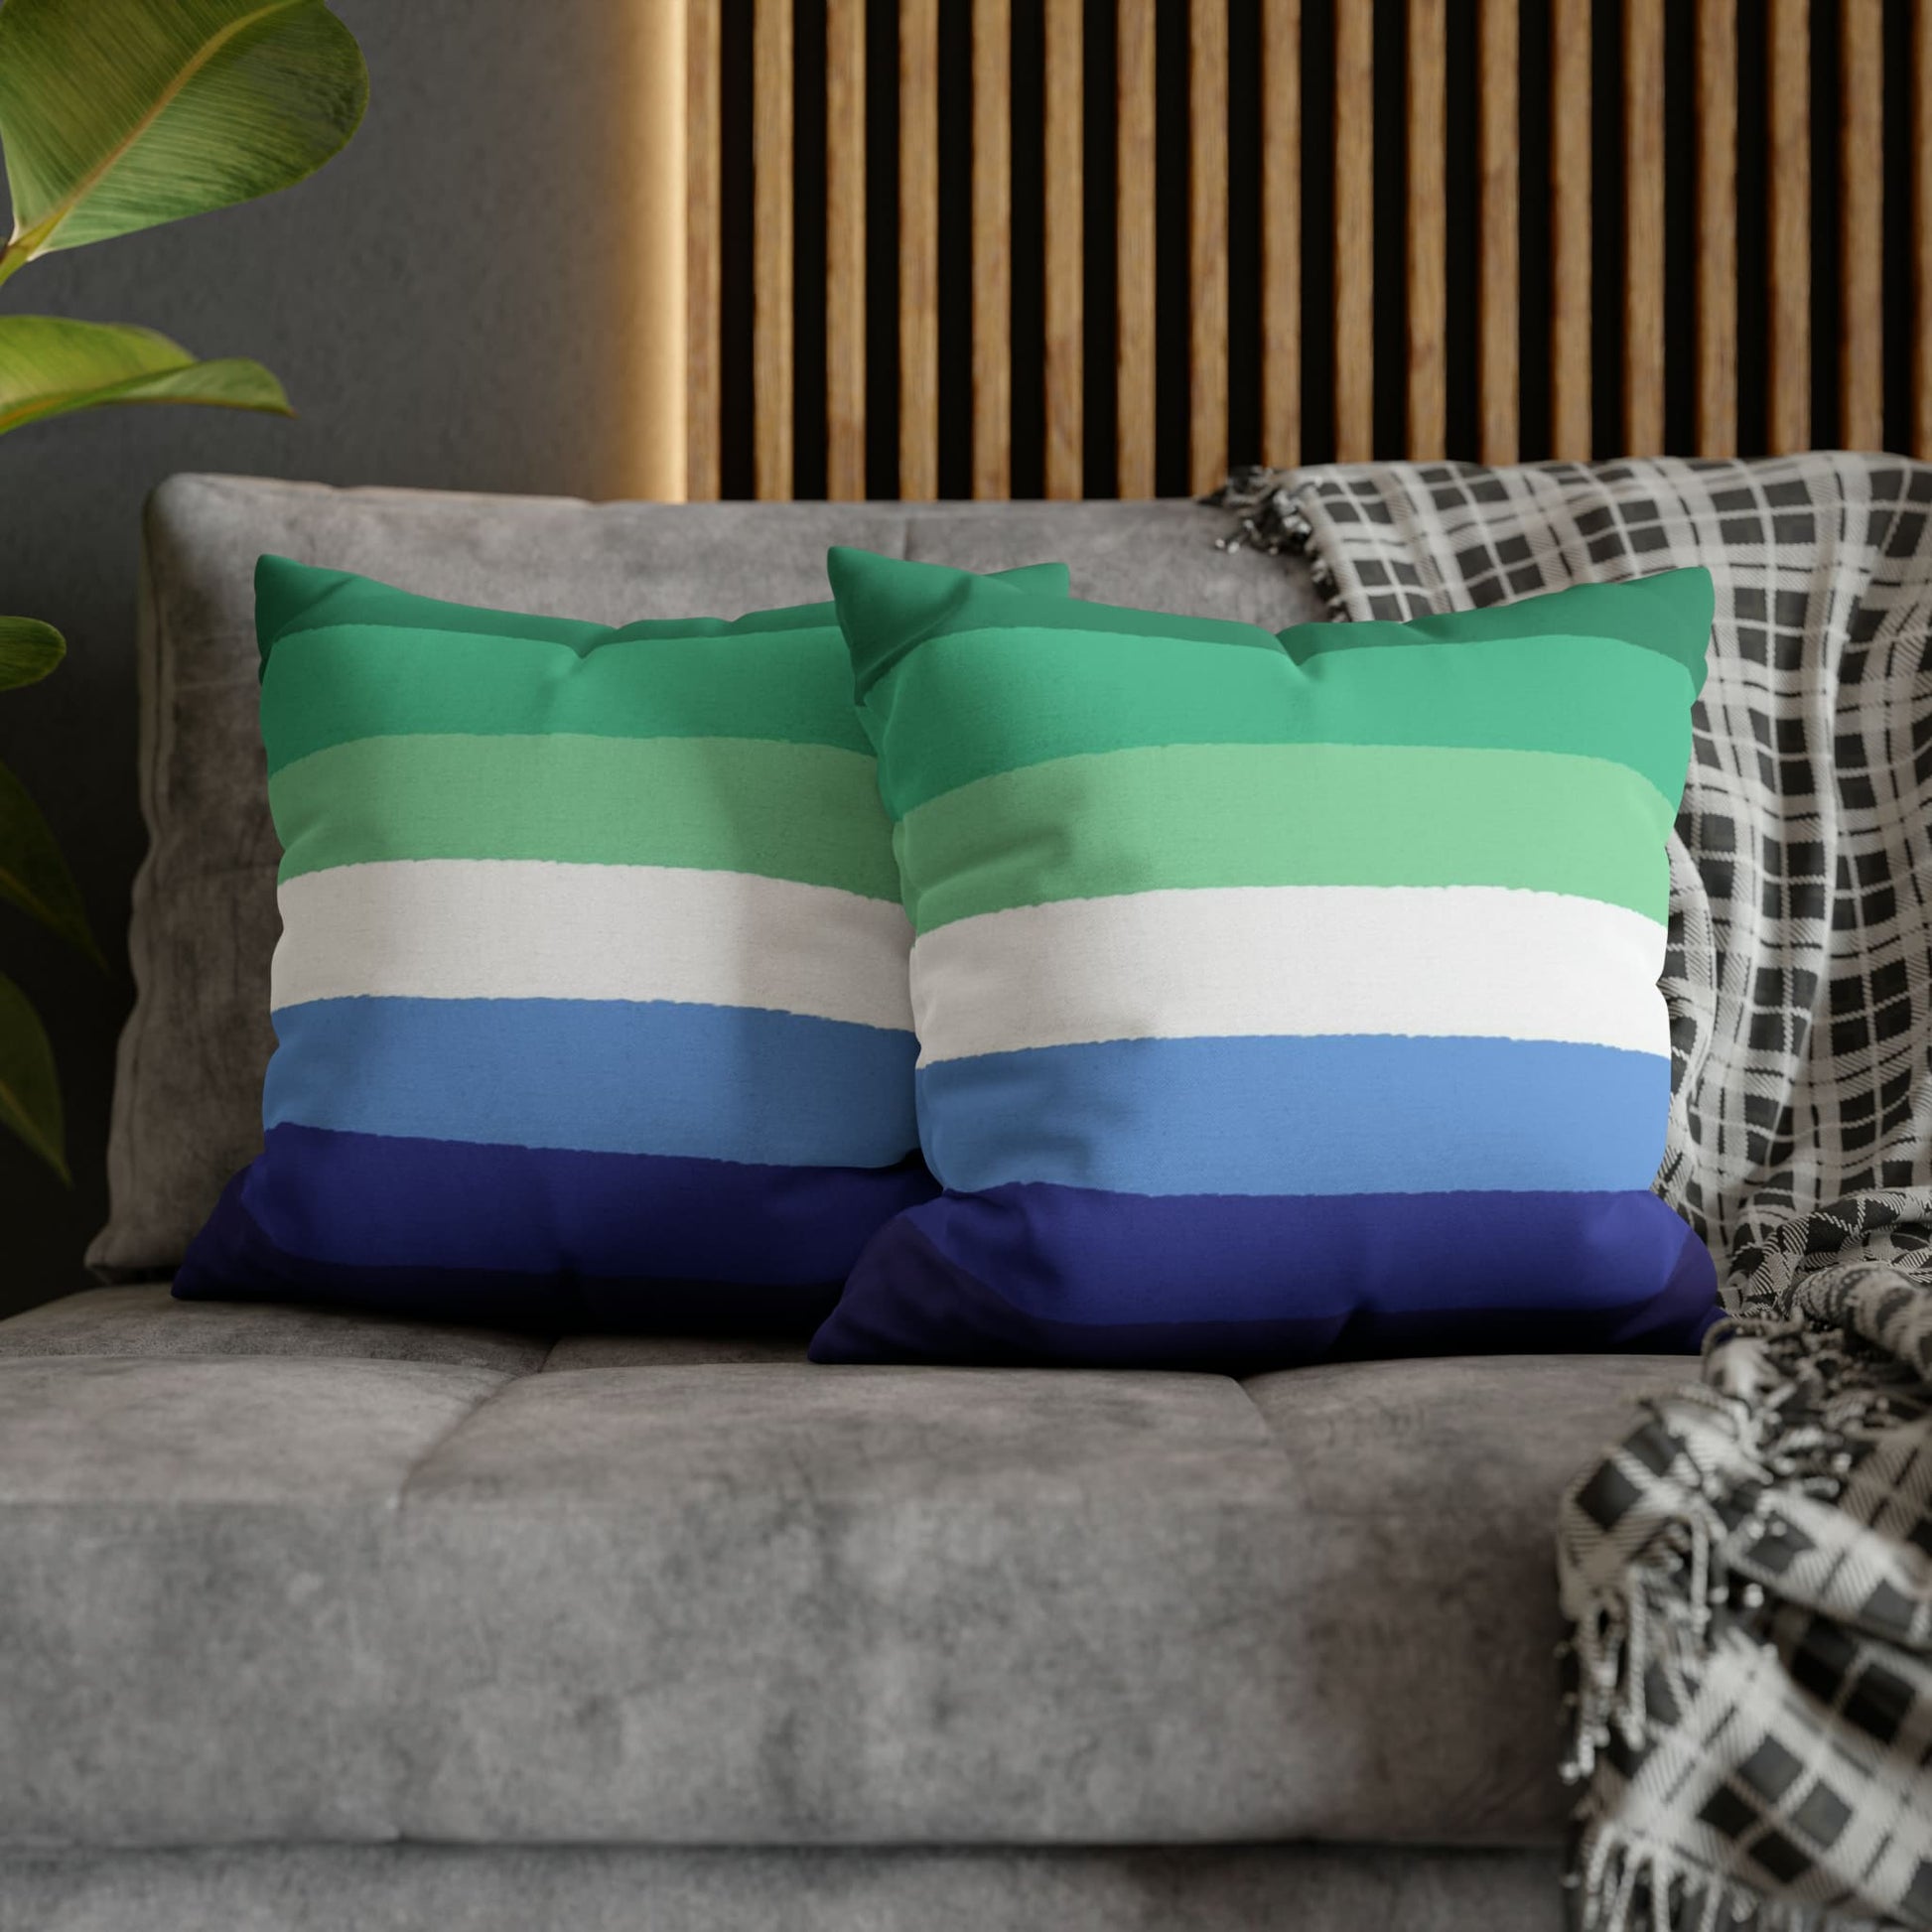 2 gay mlm vincian flag pillows on couch